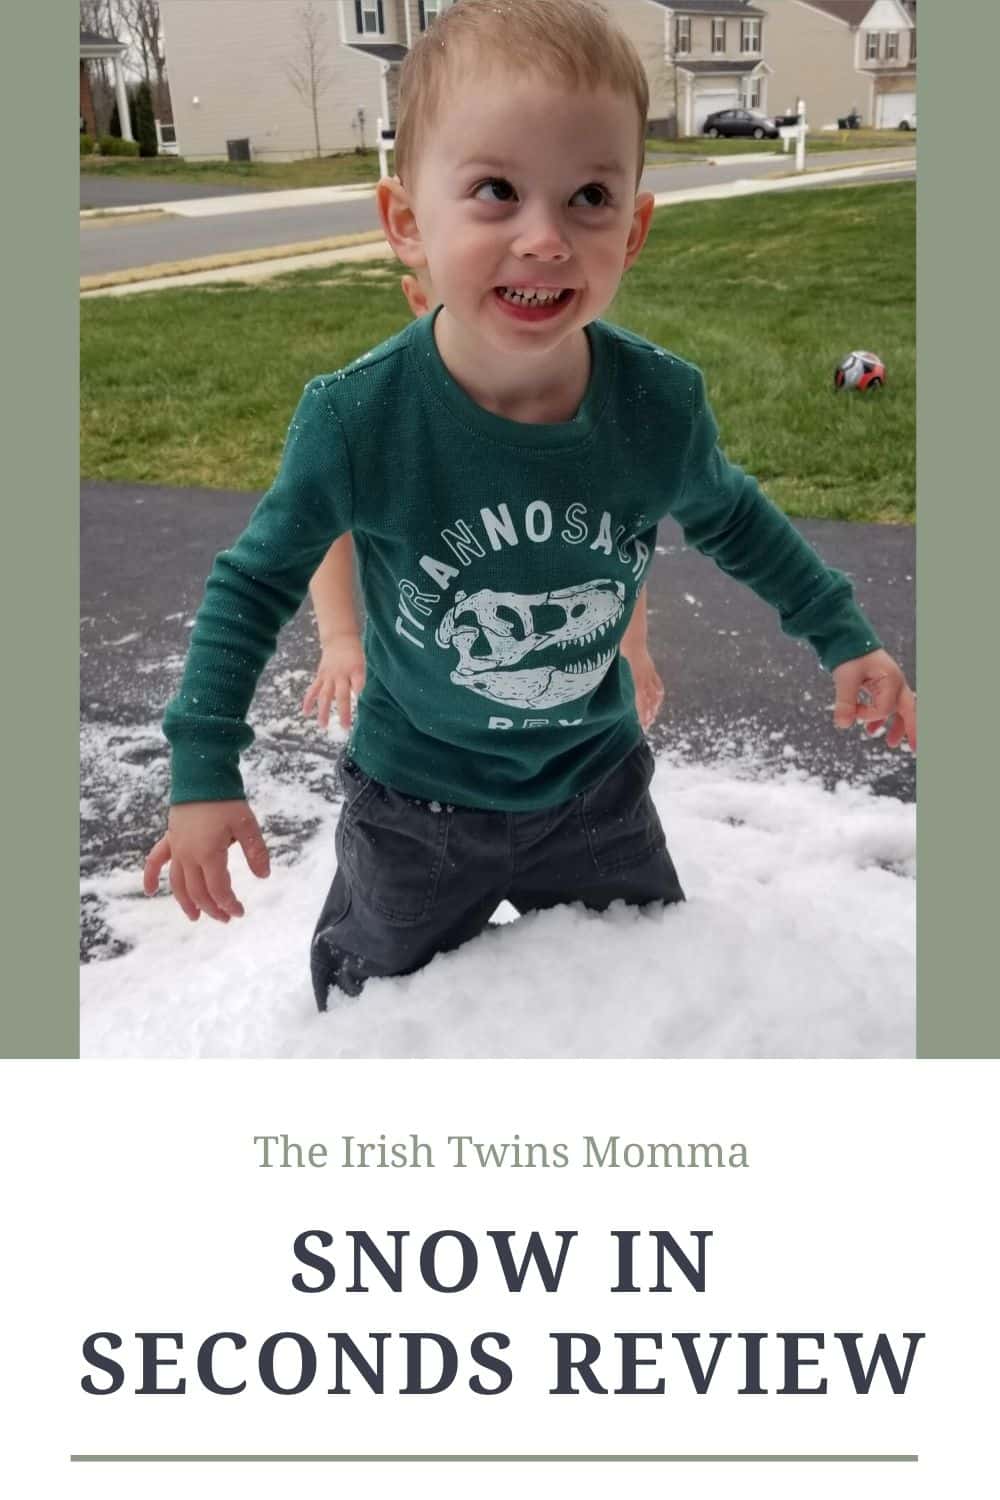 Snow in Seconds is a family-owned business that is the creator of the original fake snow. Their product is made in the U.S. and is the only instant snow that grows 100 times its size in just seconds. via @irishtwinsmom11